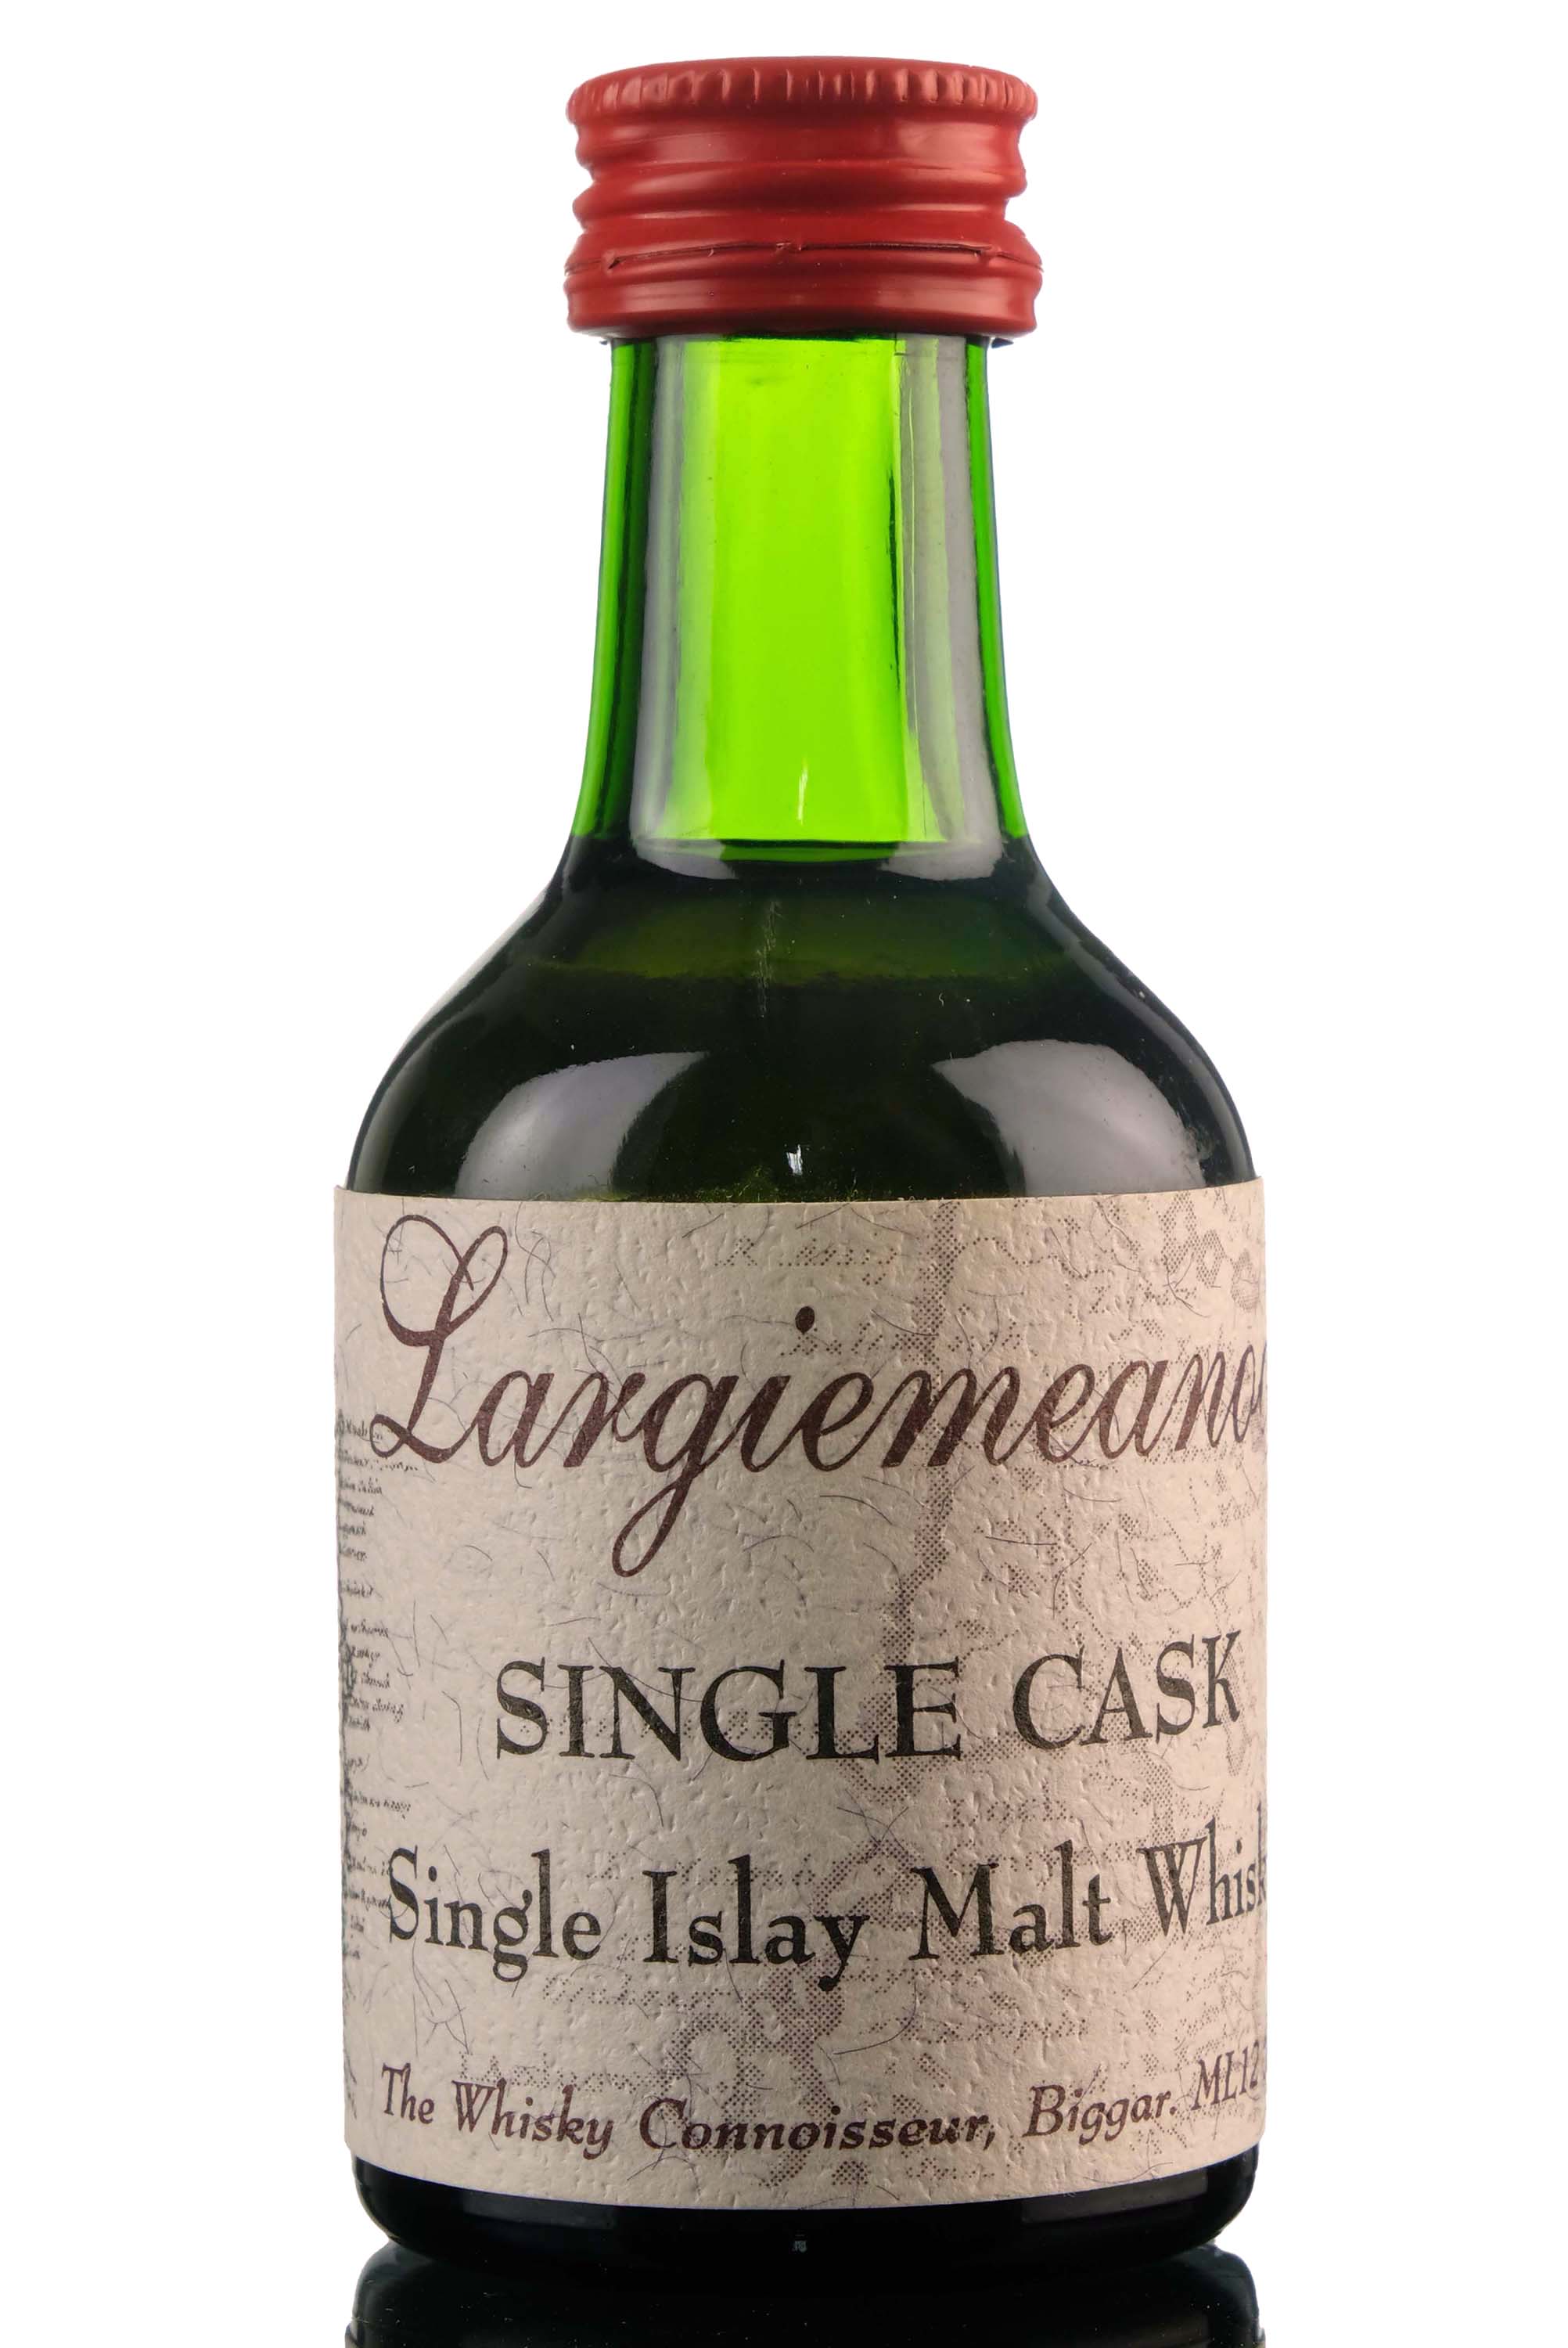 Largiemeanoch (Bowmore) 1973 - 22 Year Old - Single Cask 3139 - The Whisky Connoisseur - M